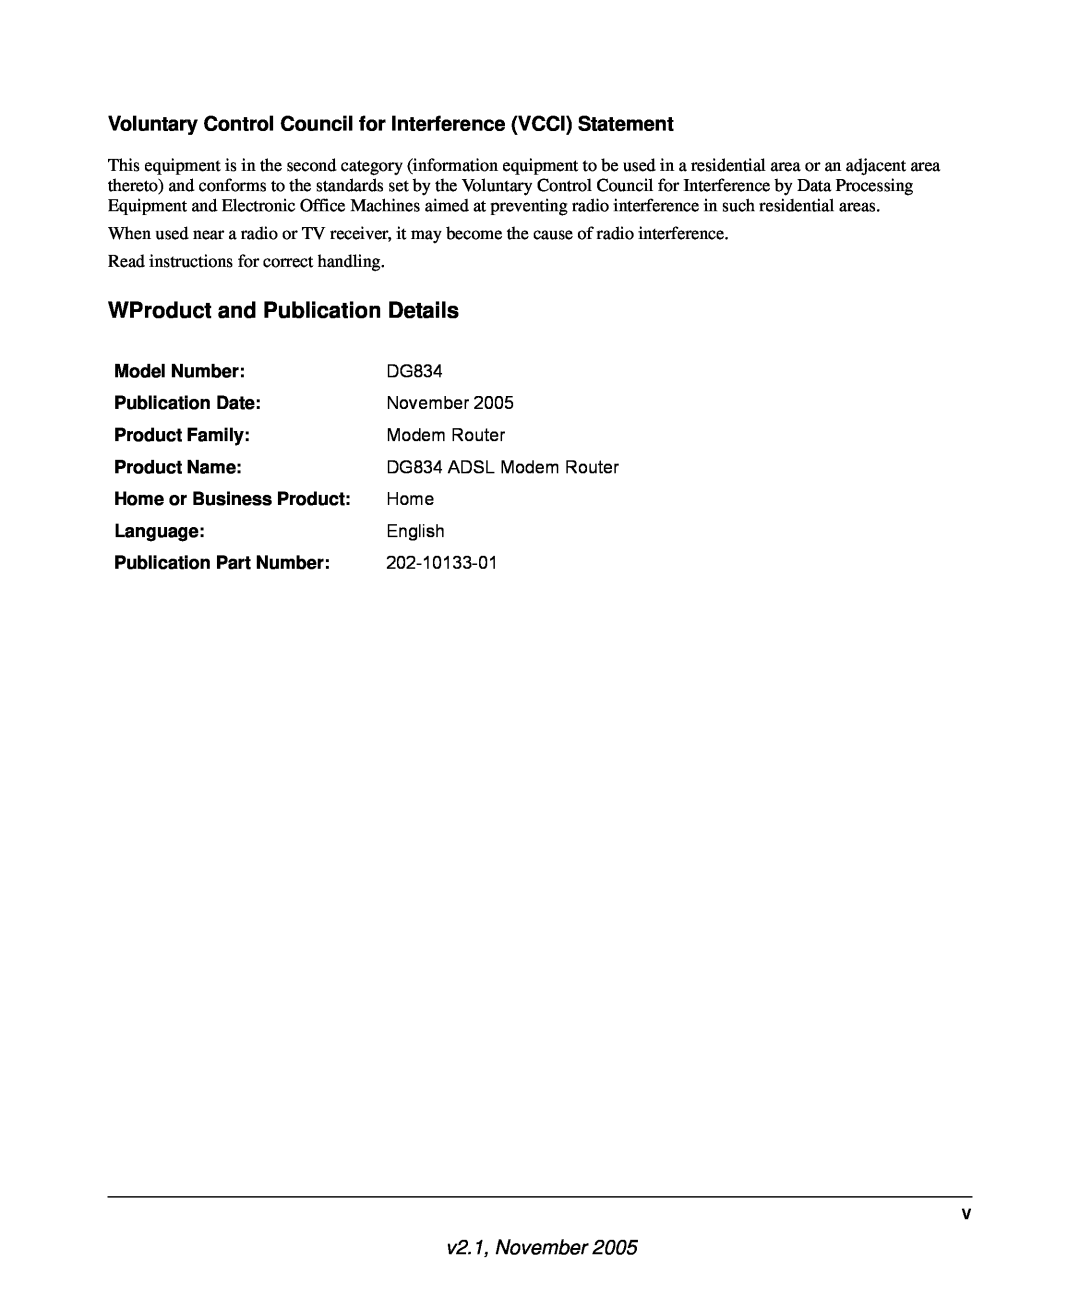 NETGEAR DG834 Voluntary Control Council for Interference VCCI Statement, WProduct and Publication Details, v2.1, November 